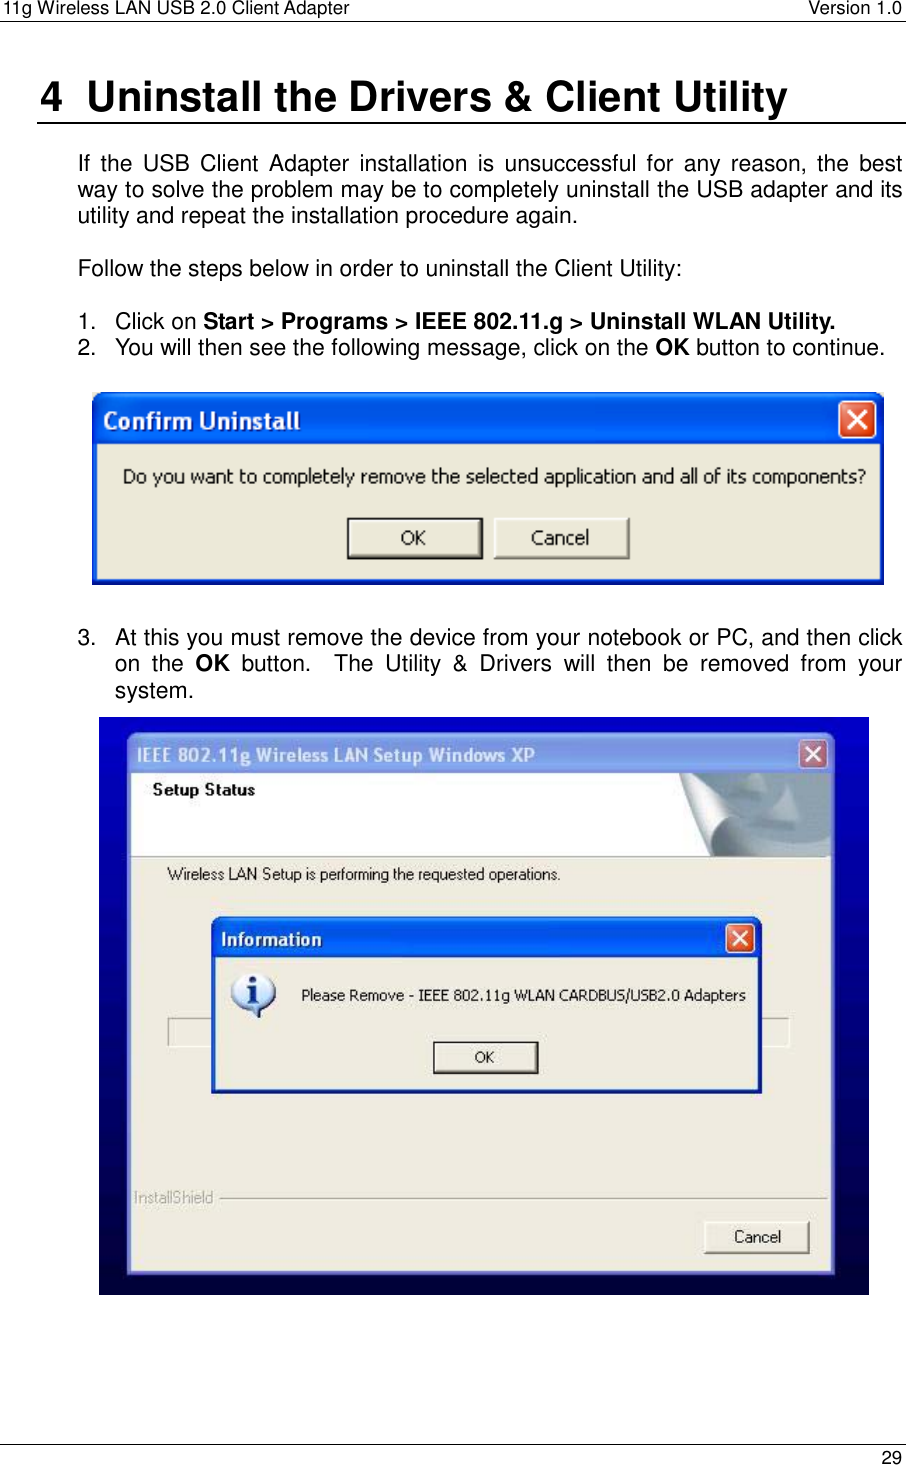 11g Wireless LAN USB 2.0 Client Adapter    Version 1.0  4  Uninstall the Drivers &amp; Client Utility  If the USB Client Adapter installation is unsuccessful for any reason, the best way to solve the problem may be to completely uninstall the USB adapter and its utility and repeat the installation procedure again.  Follow the steps below in order to uninstall the Client Utility:  1. Click on Start &gt; Programs &gt; IEEE 802.11.g &gt; Uninstall WLAN Utility. 2.  You will then see the following message, click on the OK button to continue.           3.  At this you must remove the device from your notebook or PC, and then click on the OK button.  The Utility &amp; Drivers will then be removed from your system.                         29  